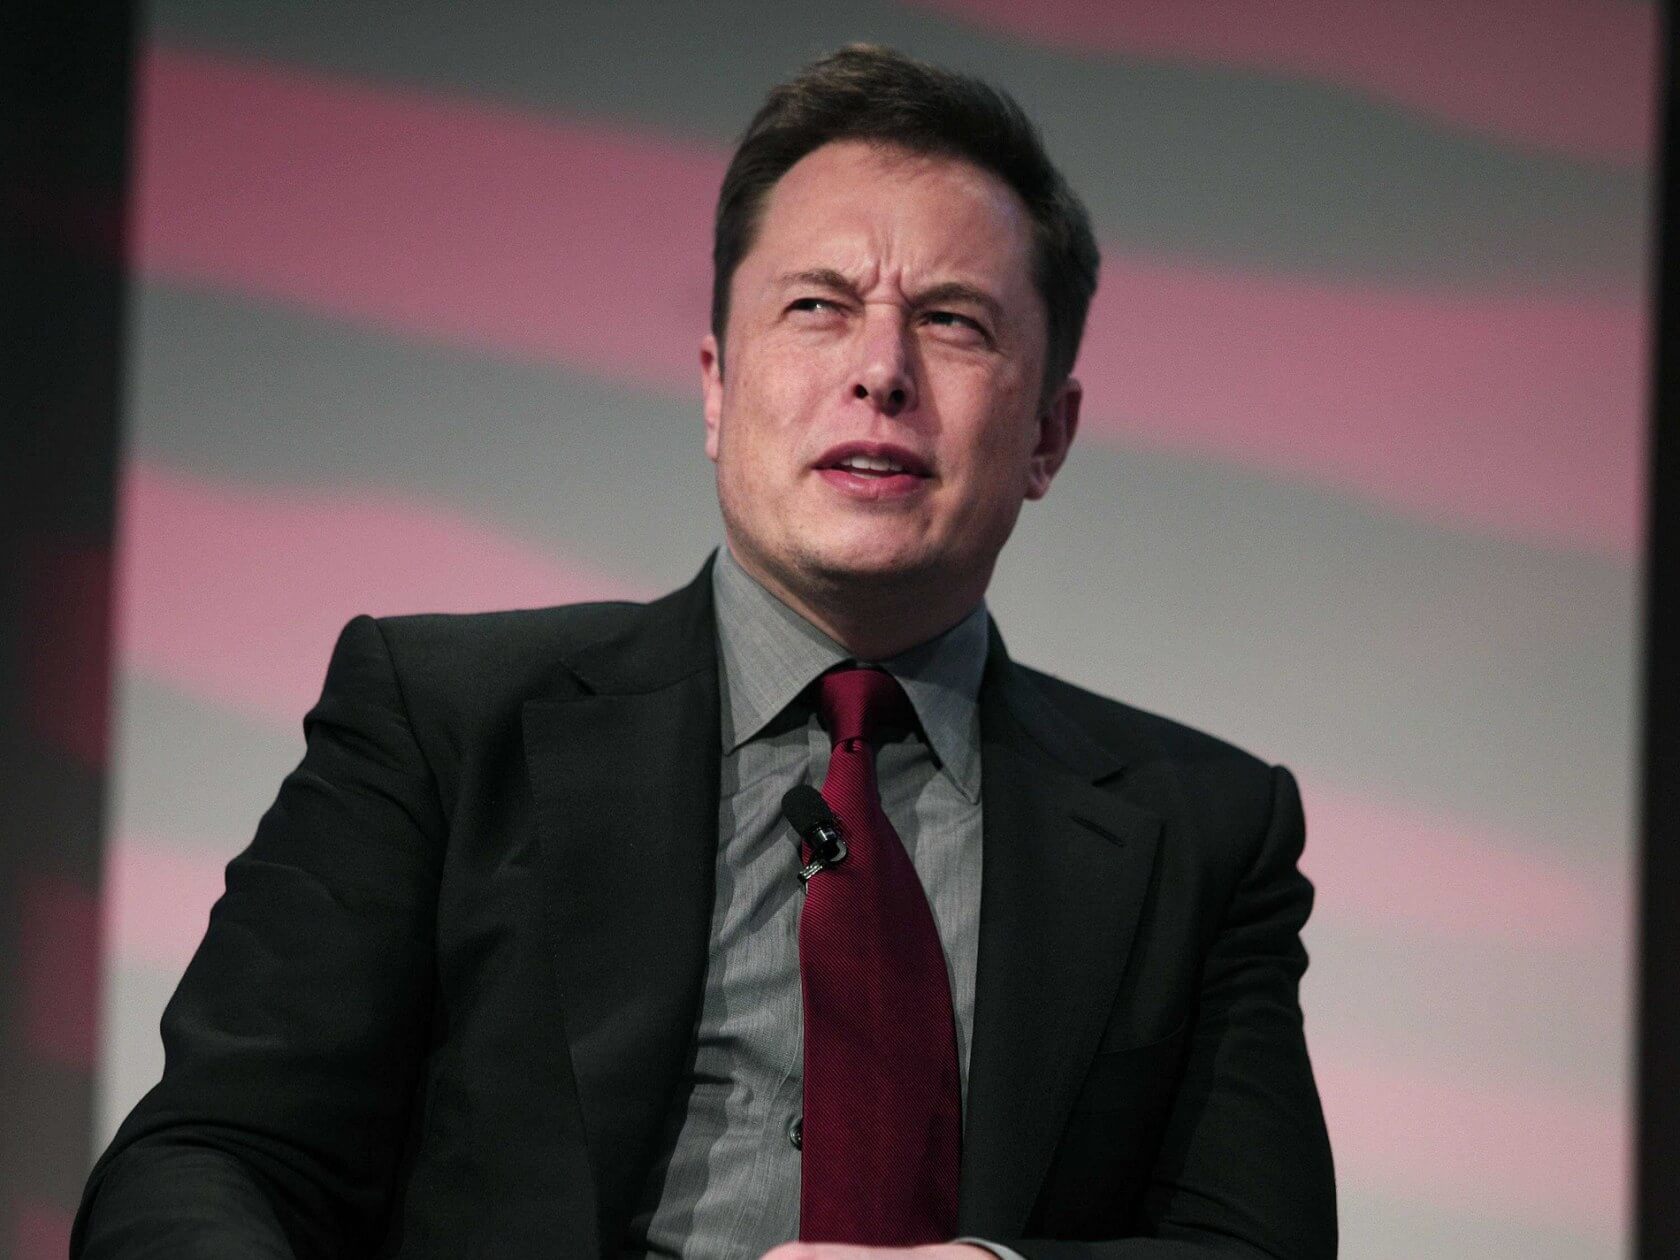 US government denies it is considering national security reviews of Elon Musk ventures